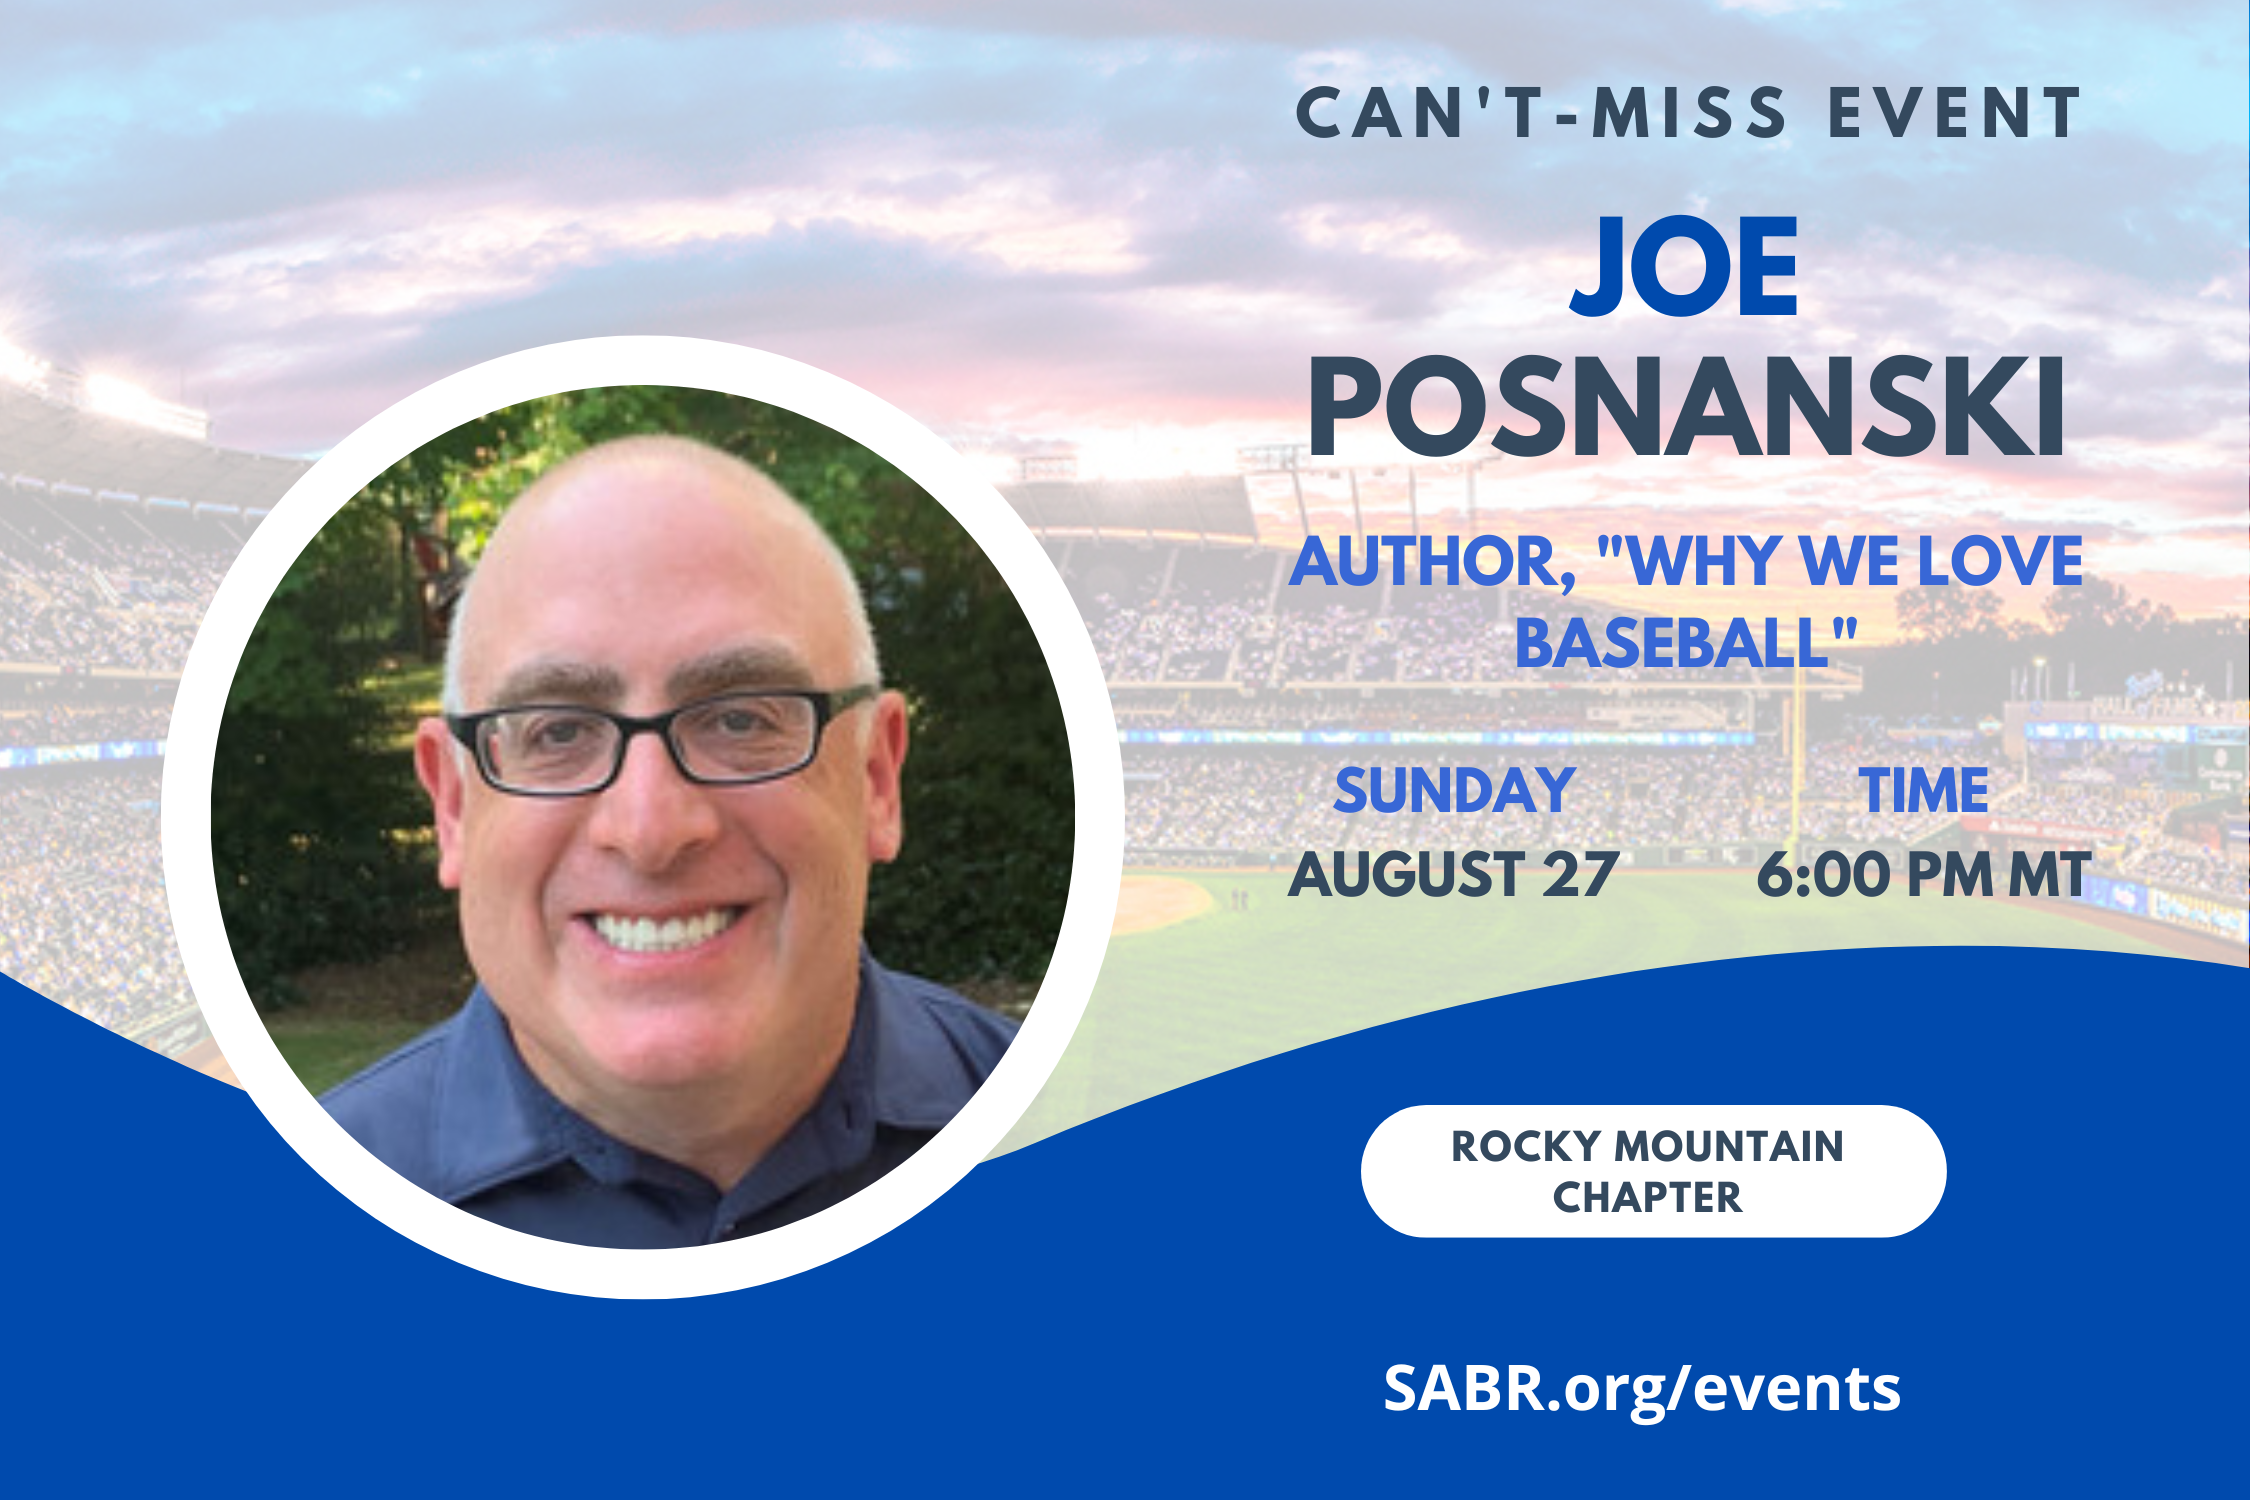 SABR's Rocky Mountain Chapter will hold a virtual Zoom meeting at 6:00 p.m. MDT on Sunday, August 27, 2023. All baseball fans are welcome to attend. Our guest will be author Joe Posnanski to discuss his new book, "Why We Love Baseball."